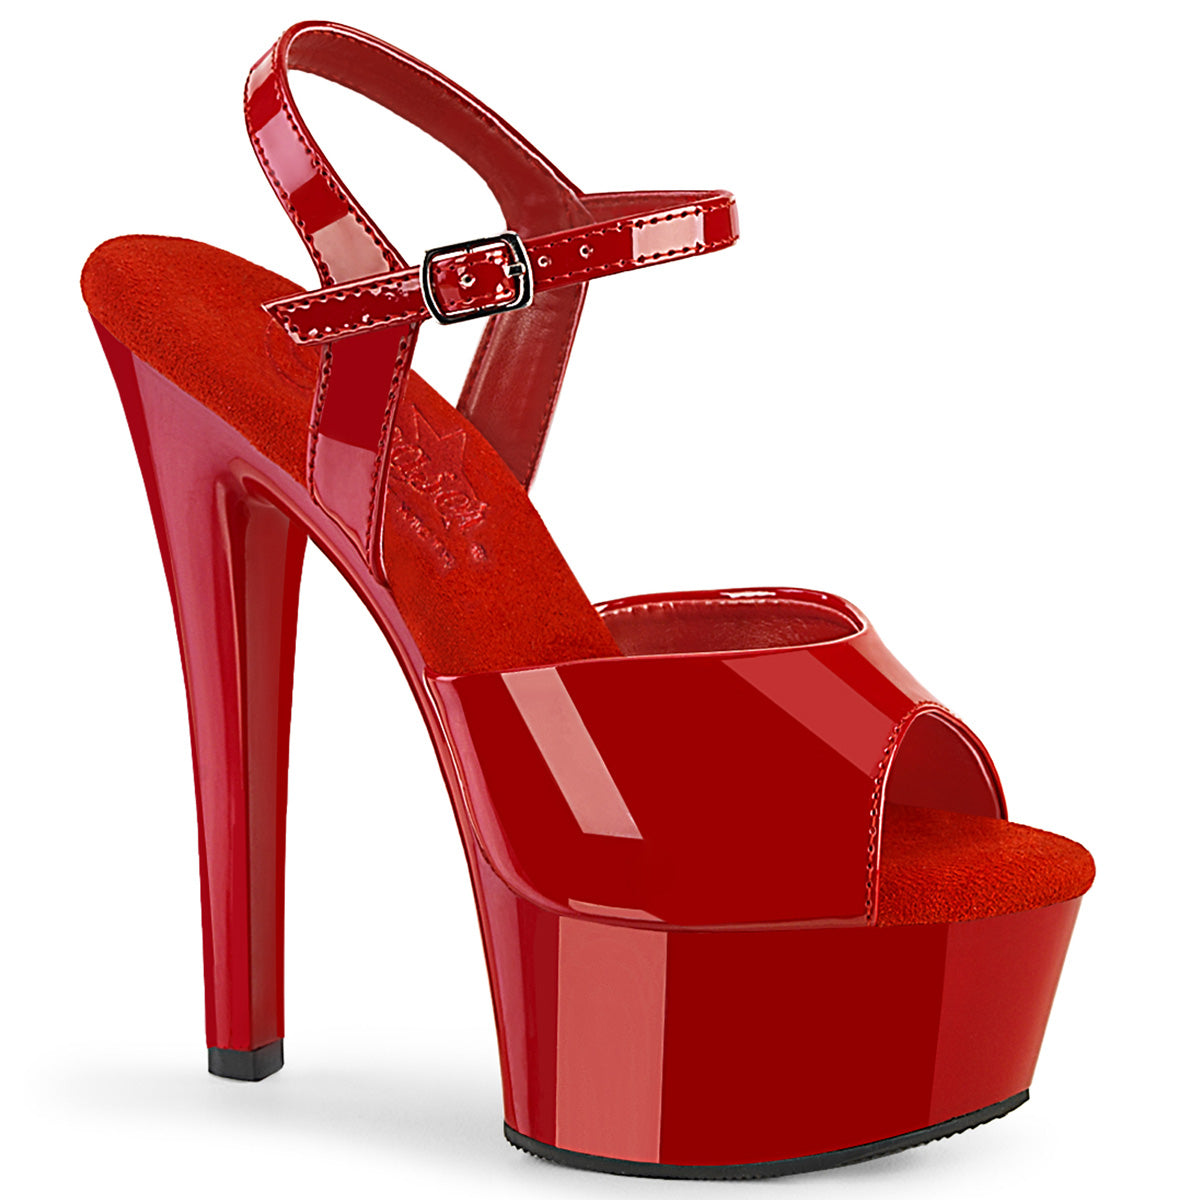 Pleaser  Sandals GLEAM-609 Red Pat/Red